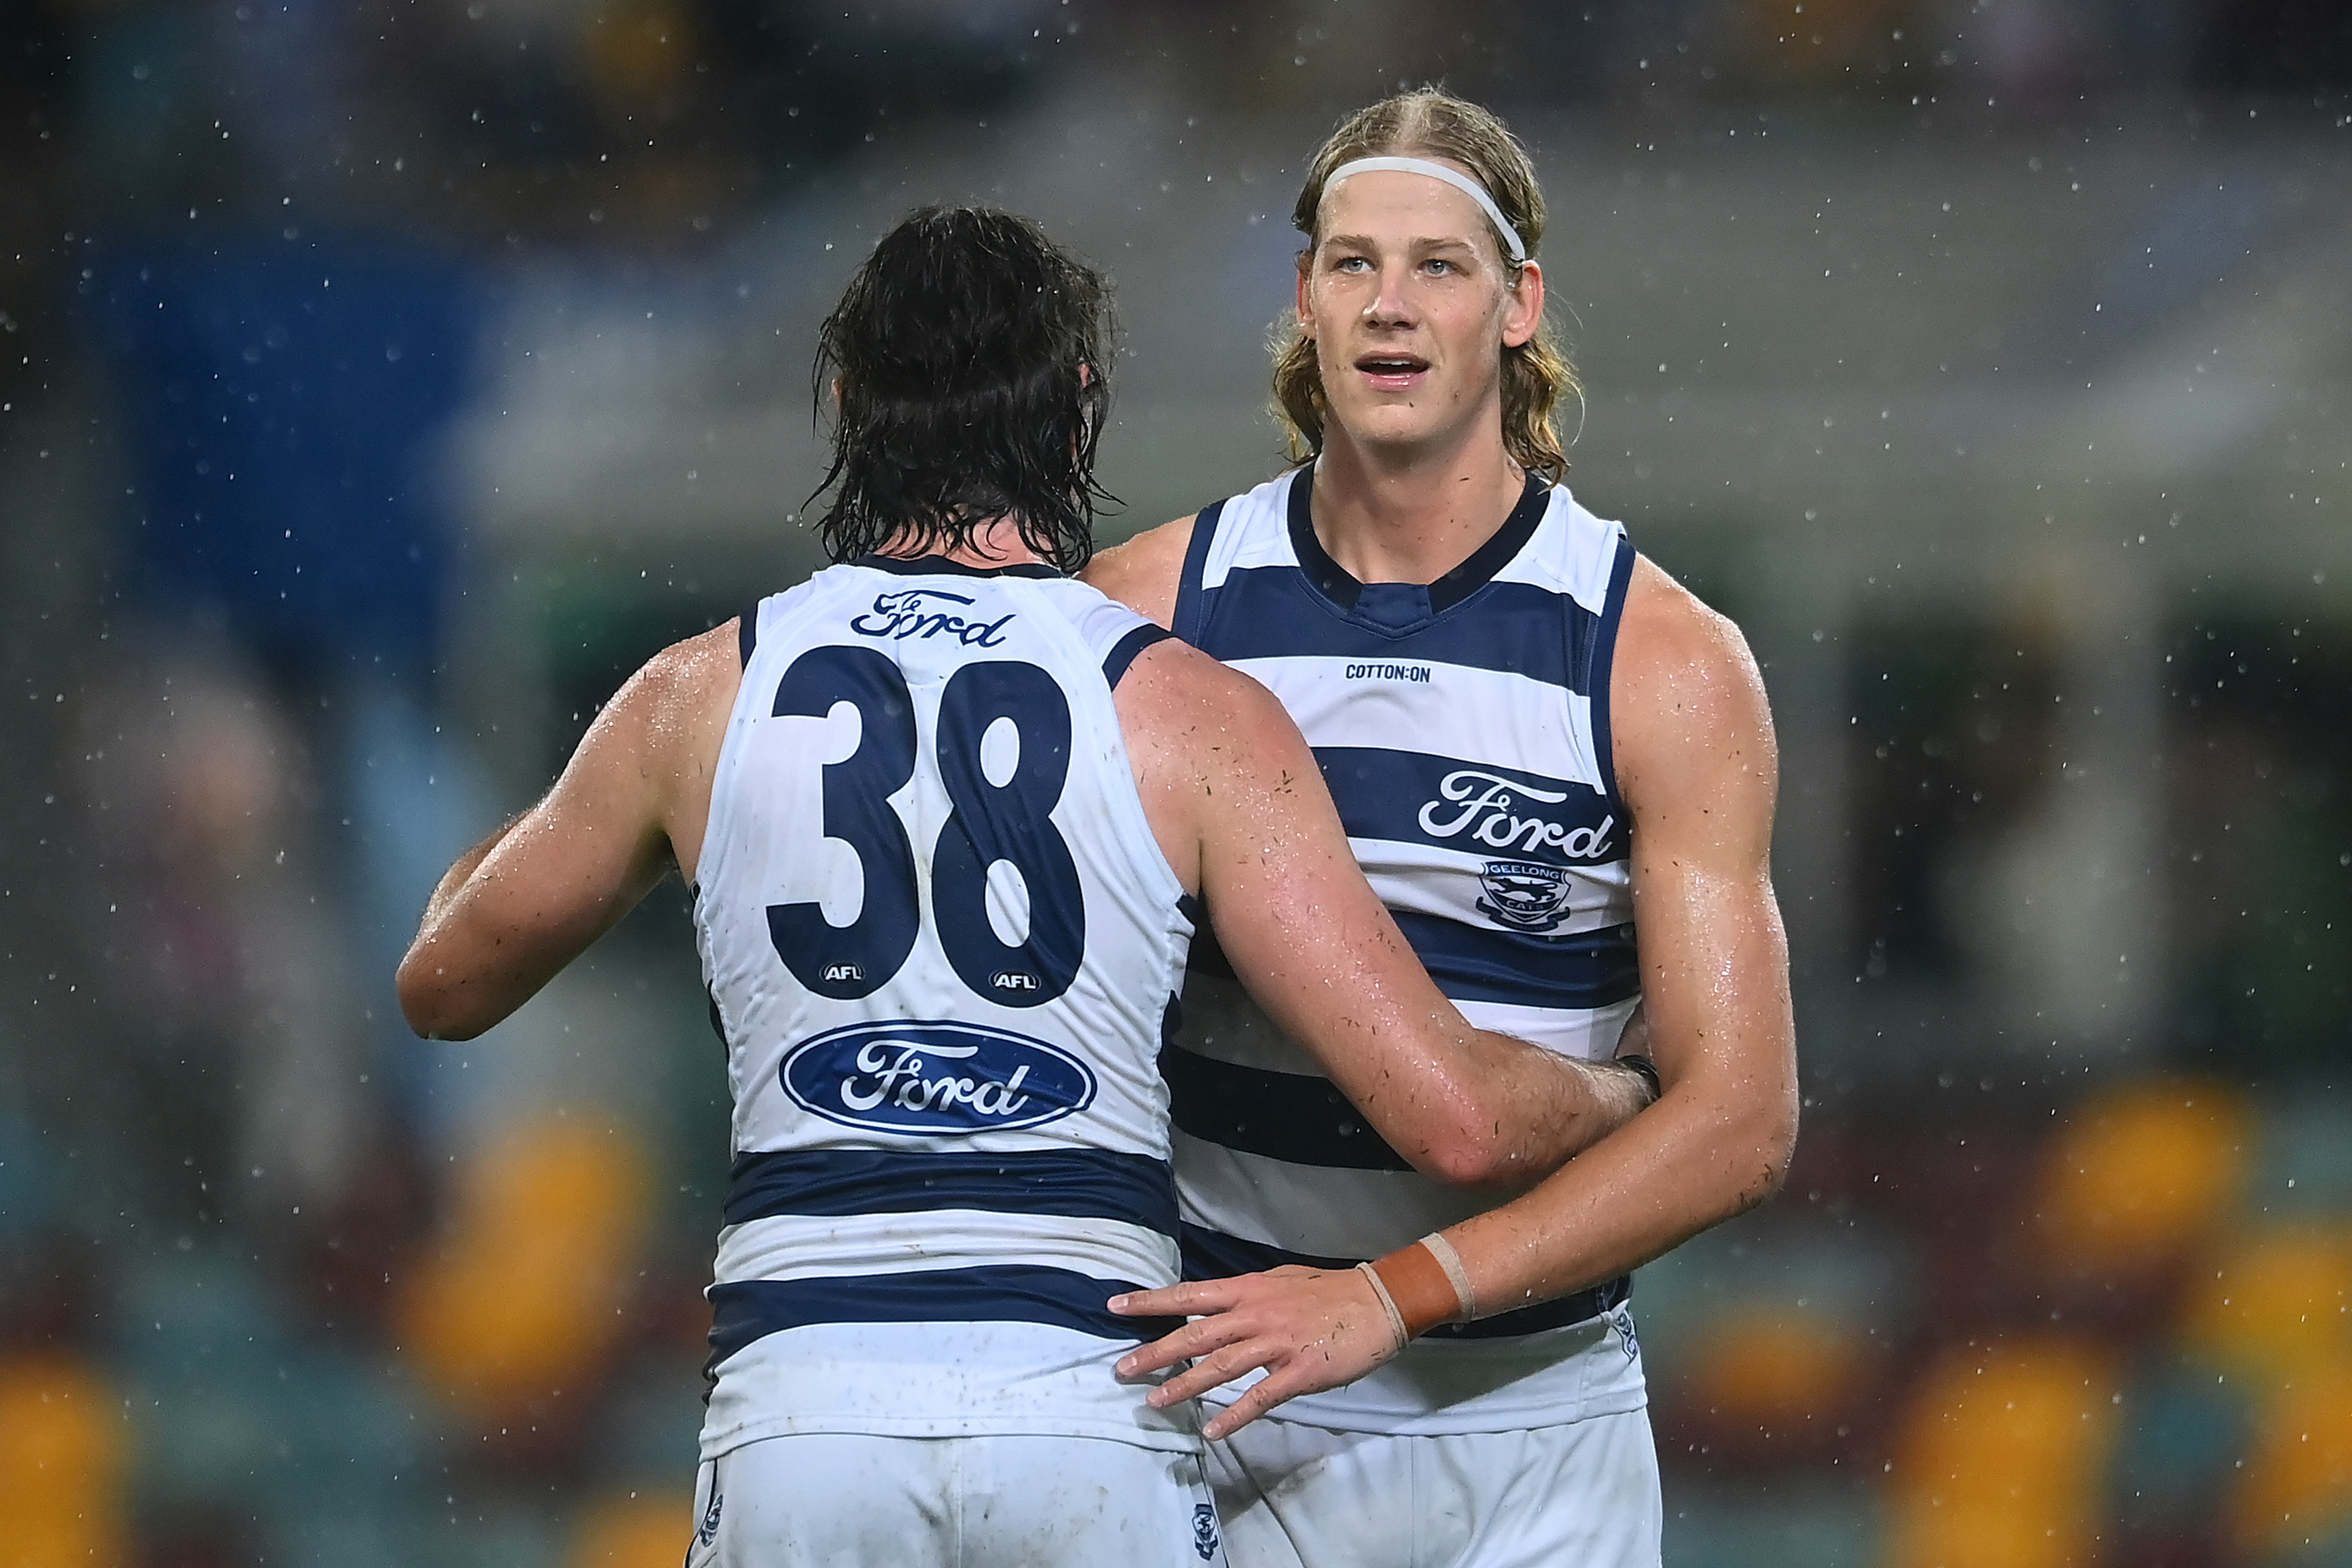 Sam De Koning is a crucial cog in the Cats backline.